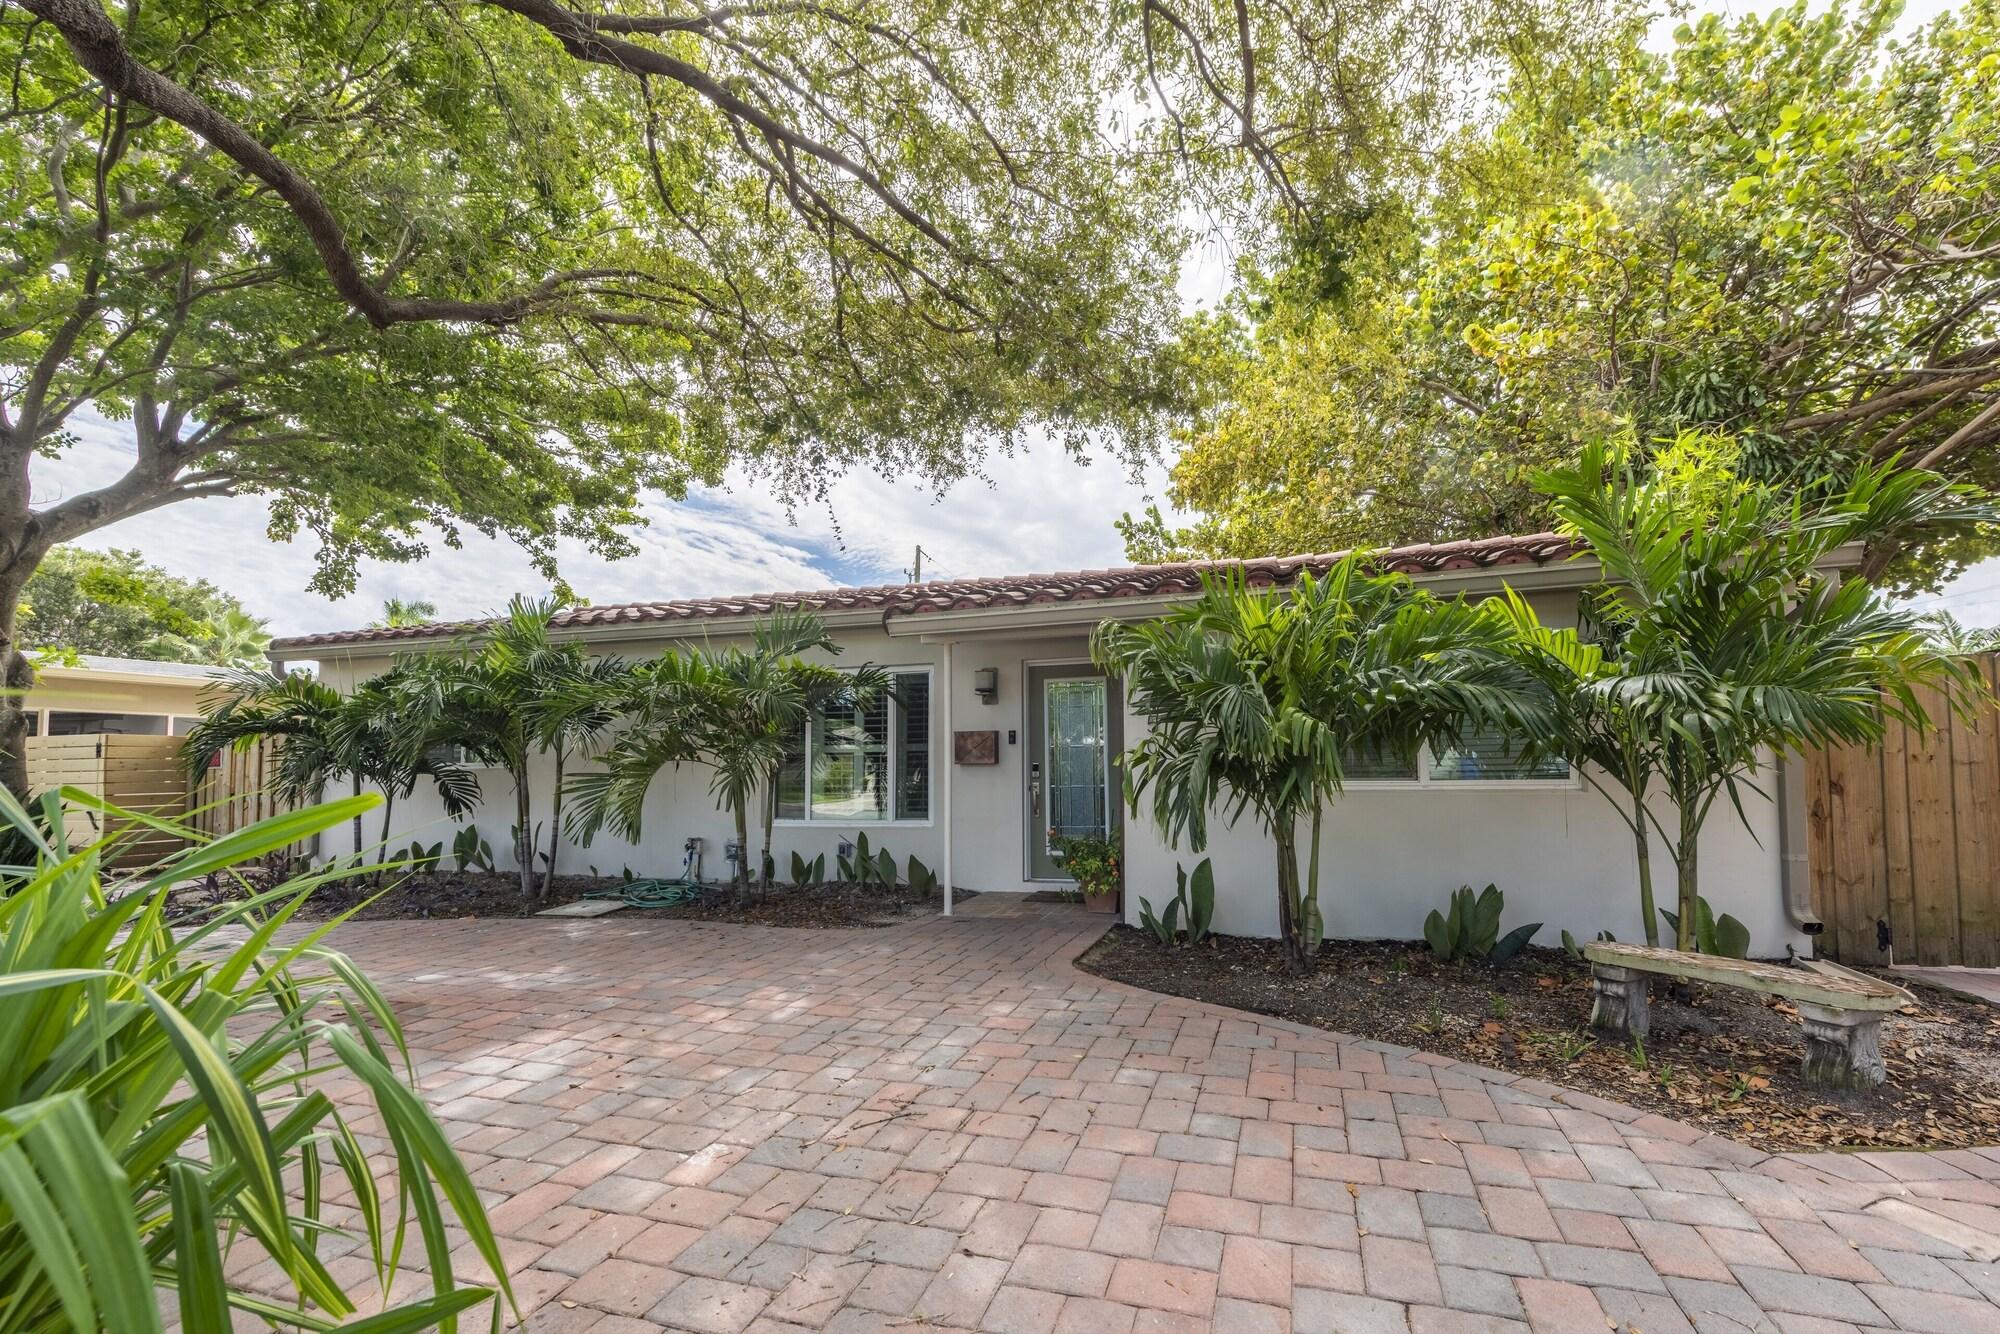 Exterior View Recently Renovated Paradise W/ Private Pool! Close To Everything! 3 Bedroom Home